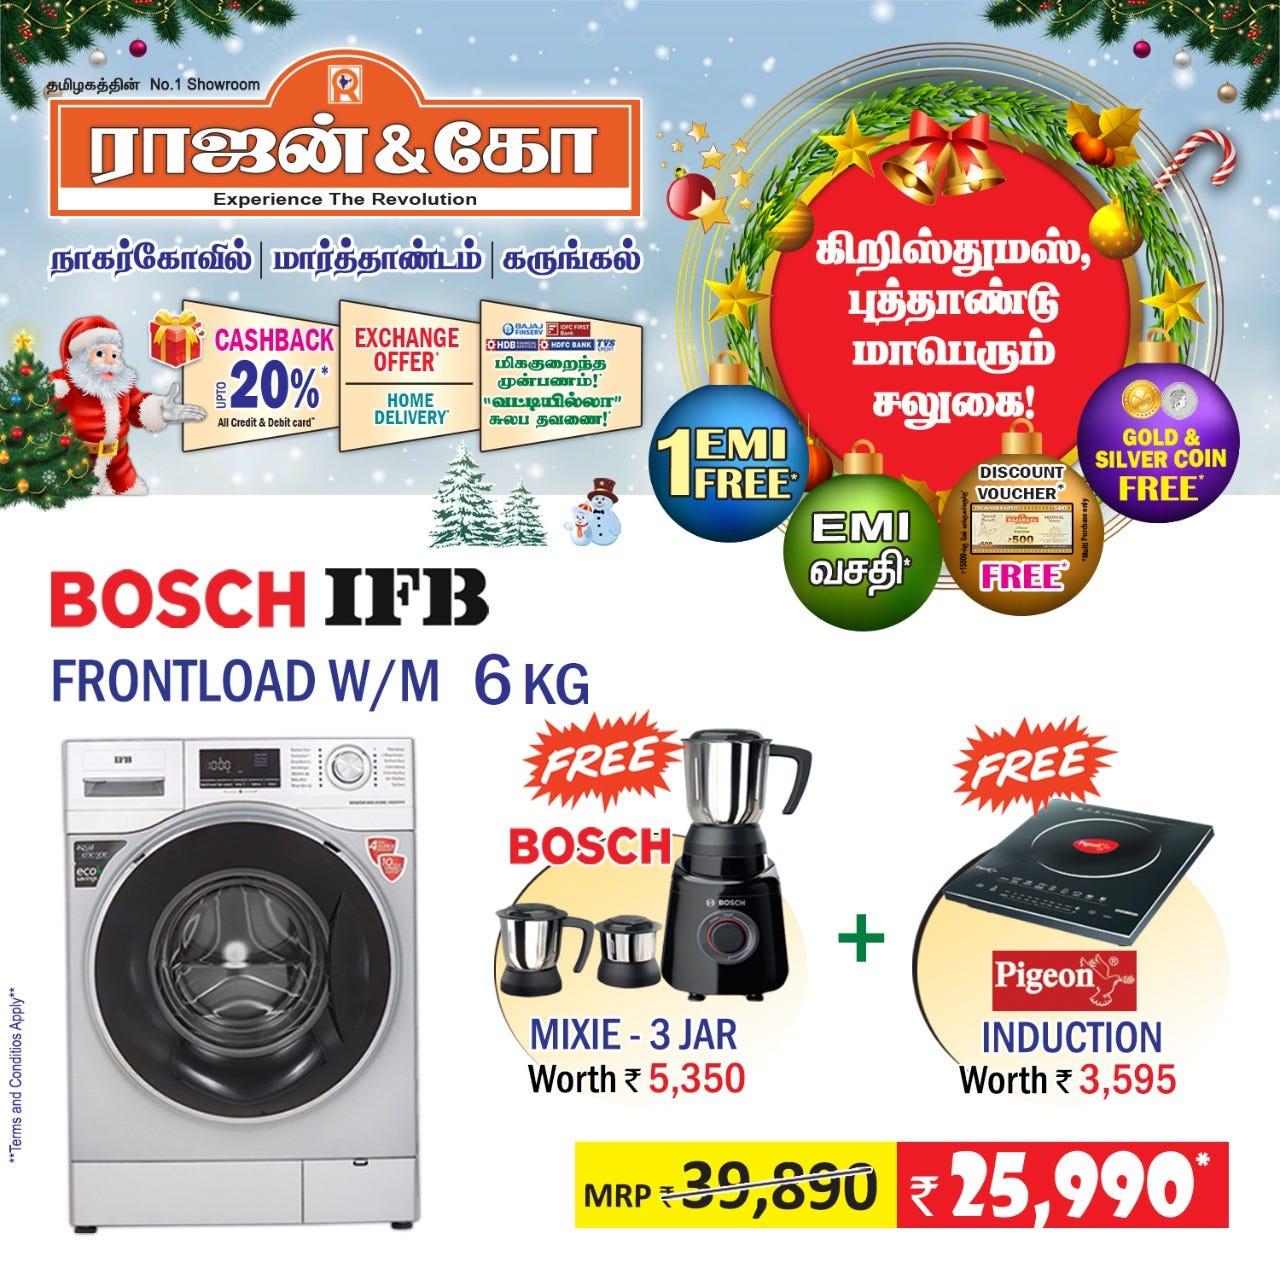 Best Home Appliances Showroom In Nagercoil, Best Kitchen Appliances Showroom In Nagercoil, Rajan & Co